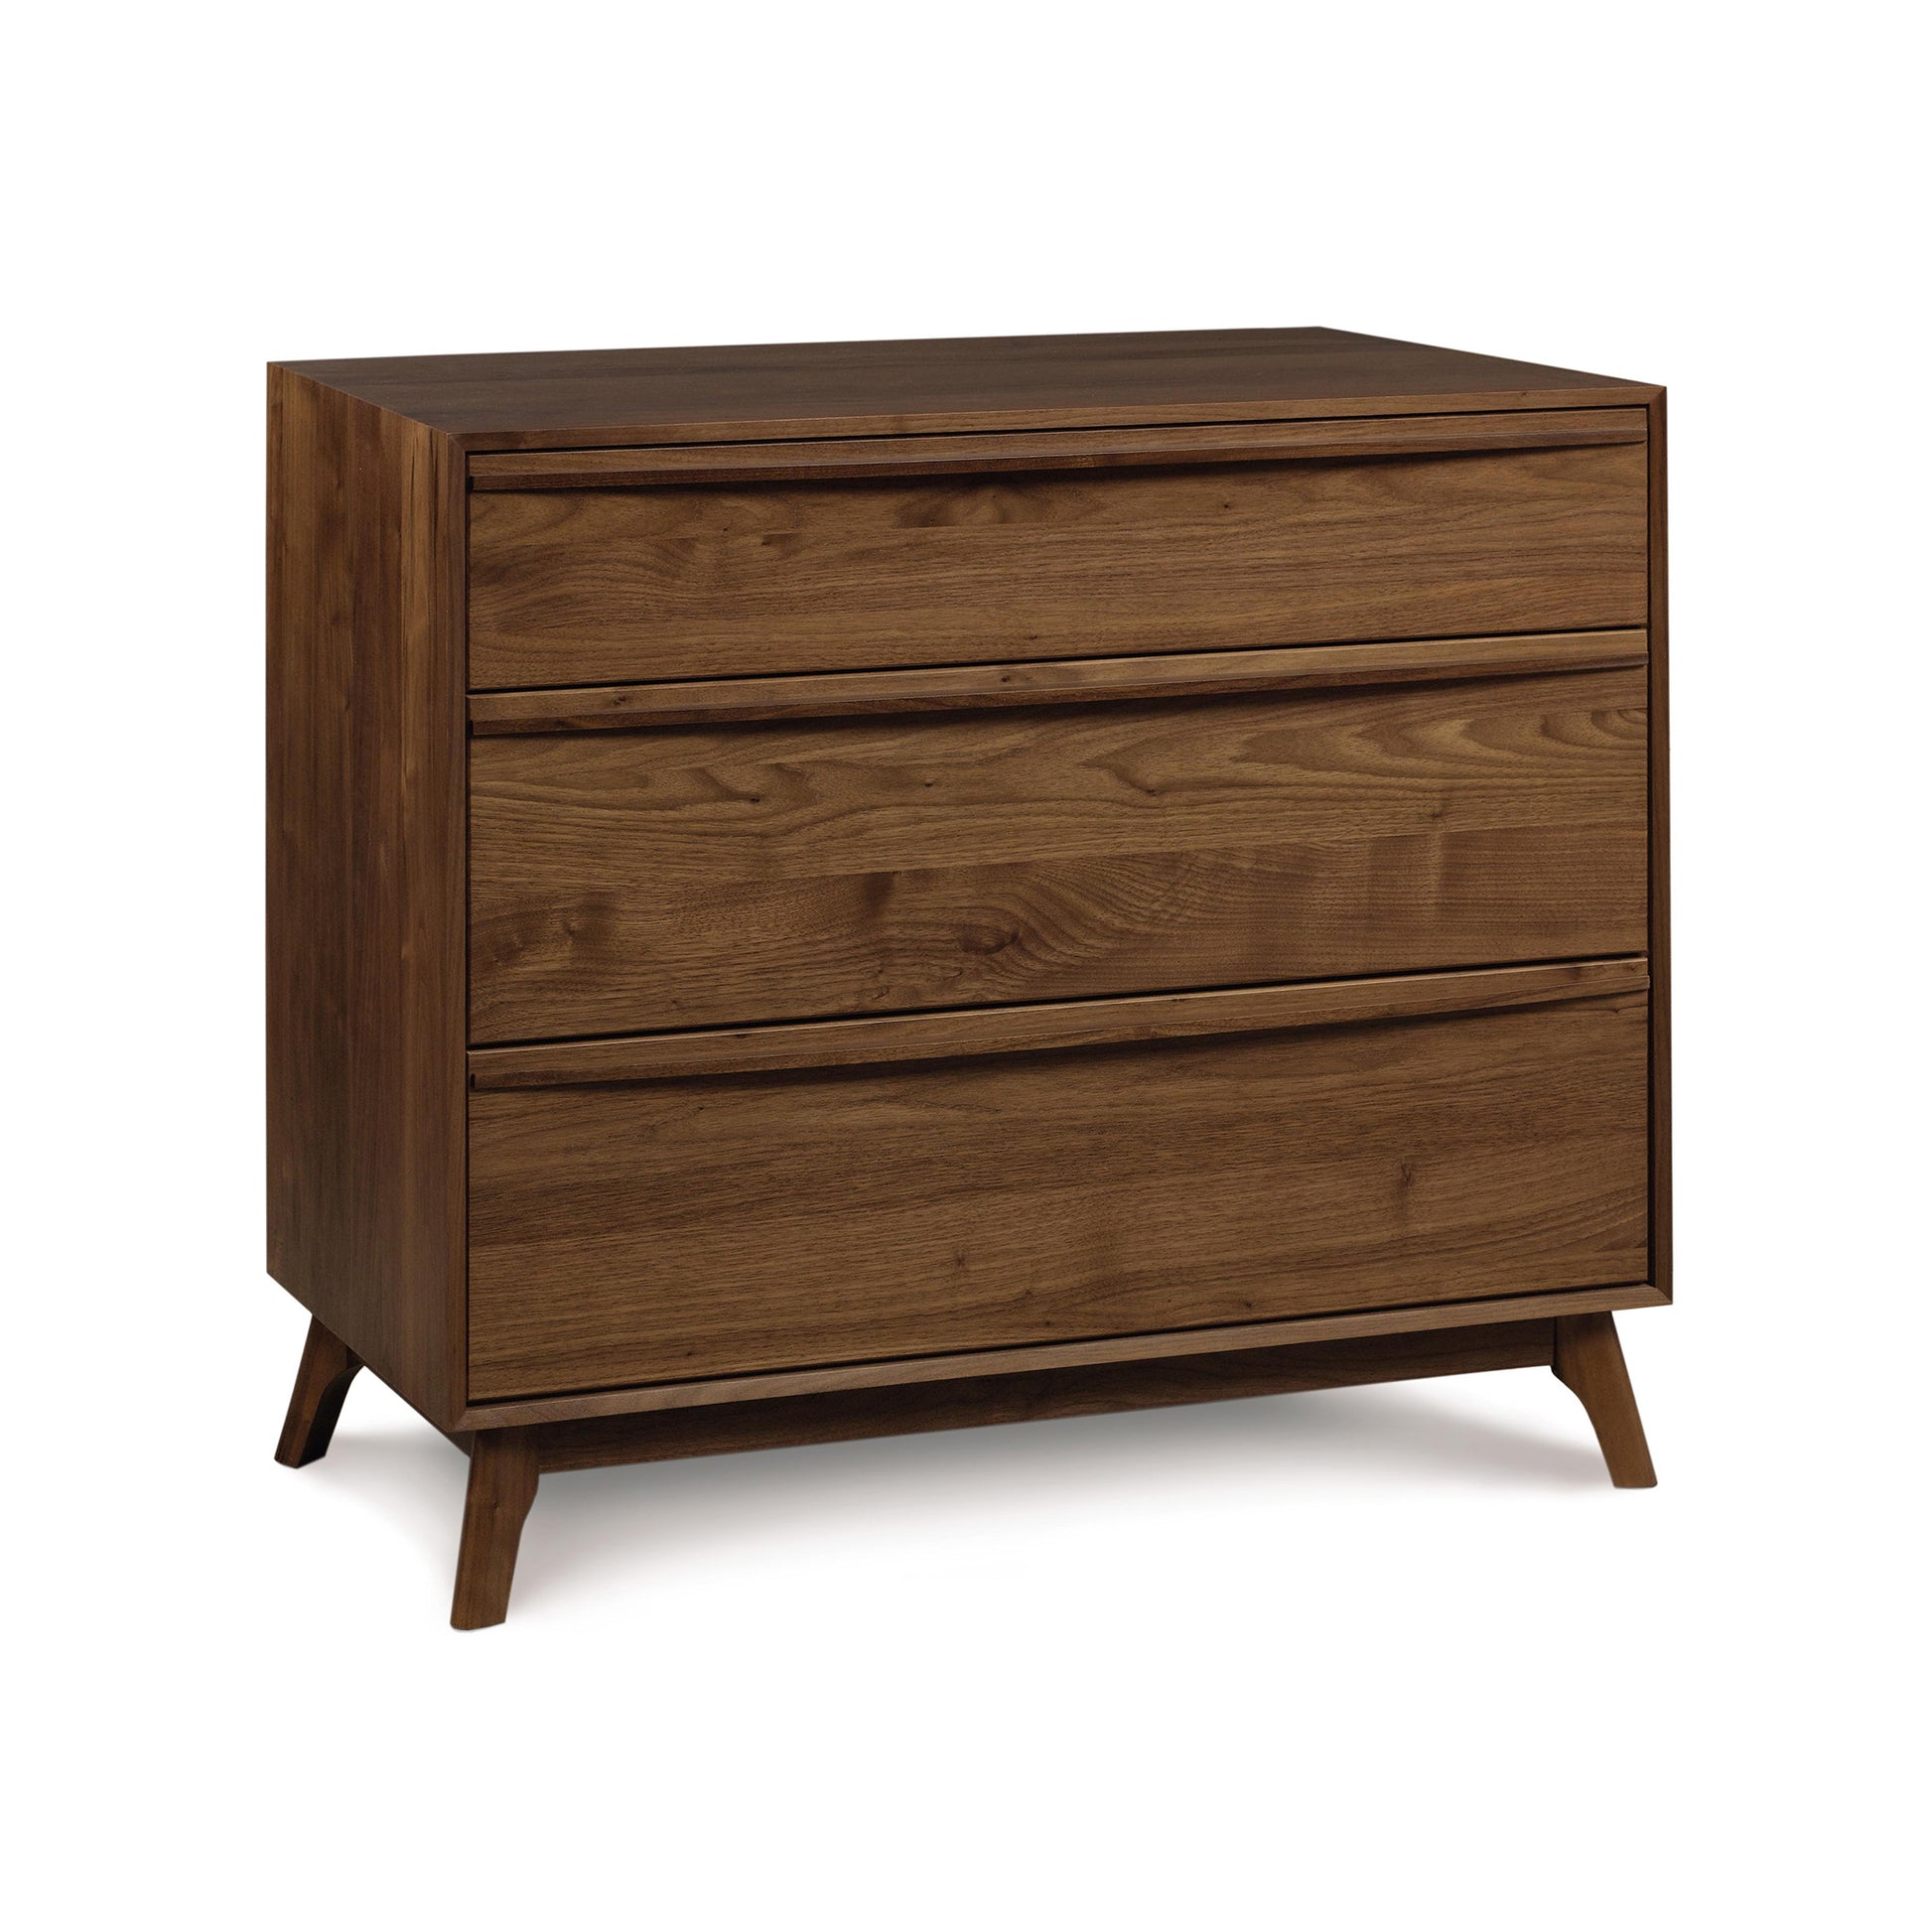 A Copeland Furniture Catalina 3-Drawer Chest on a plain background, crafted from solid natural cherry.